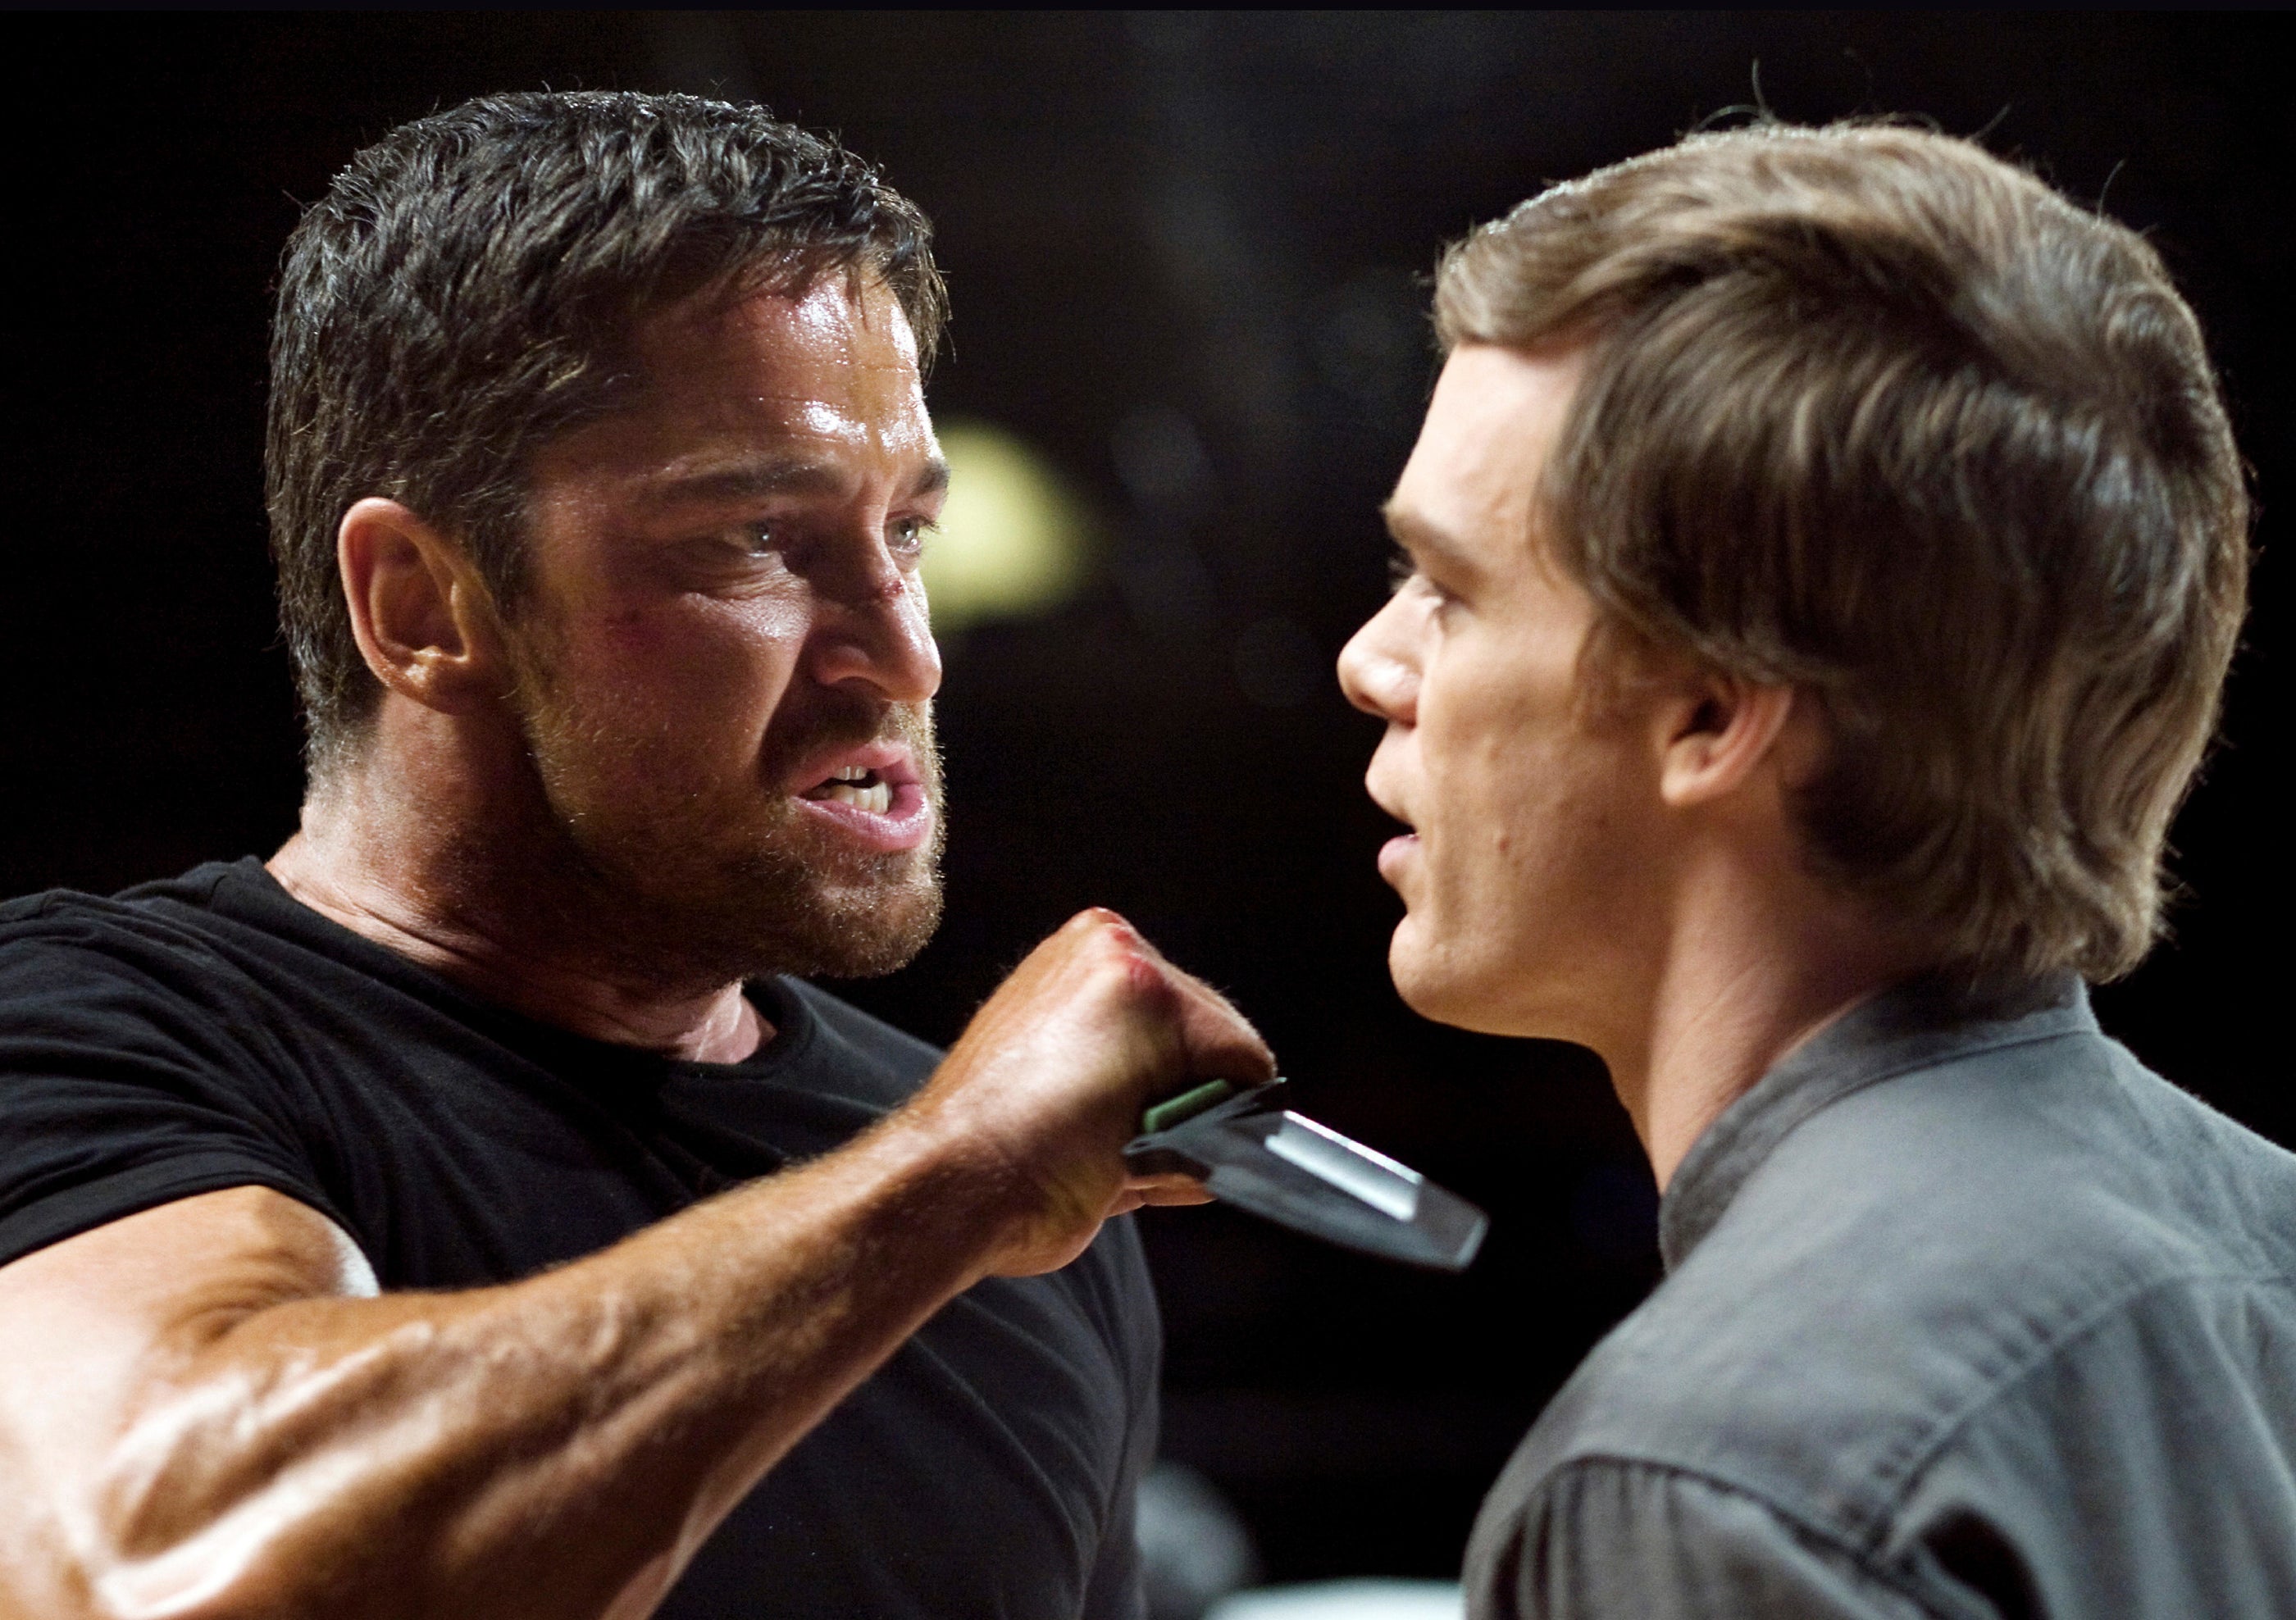 Gerard Butler and Michael C. Hall in &quot;Gamer&quot;